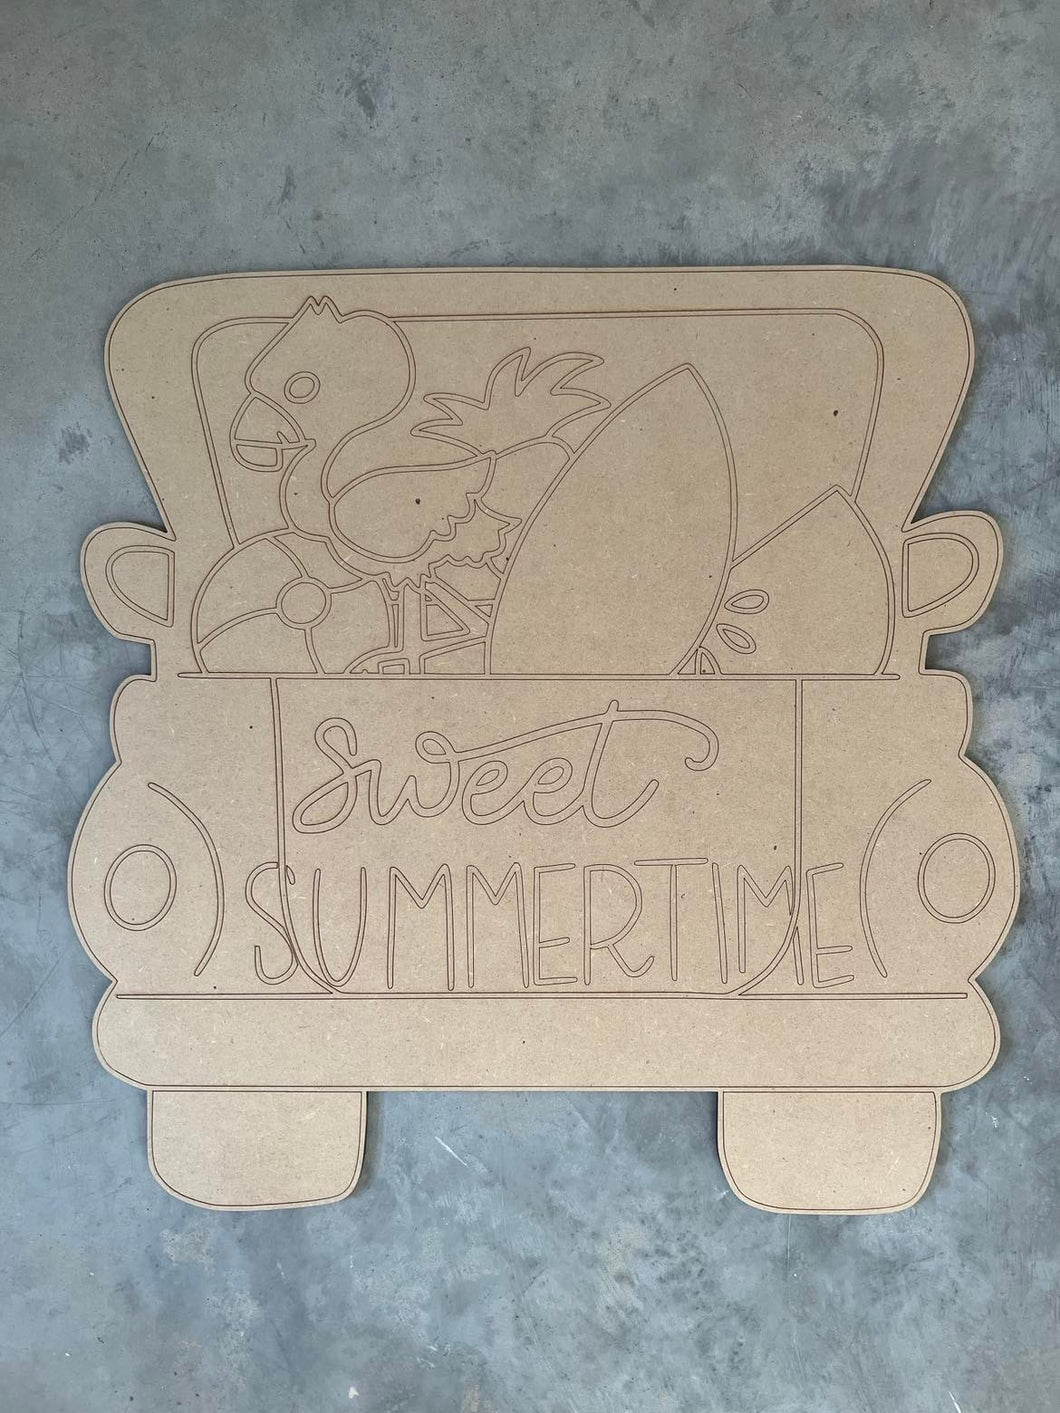 Cut and Traced Sweet Summertime Back of Truck